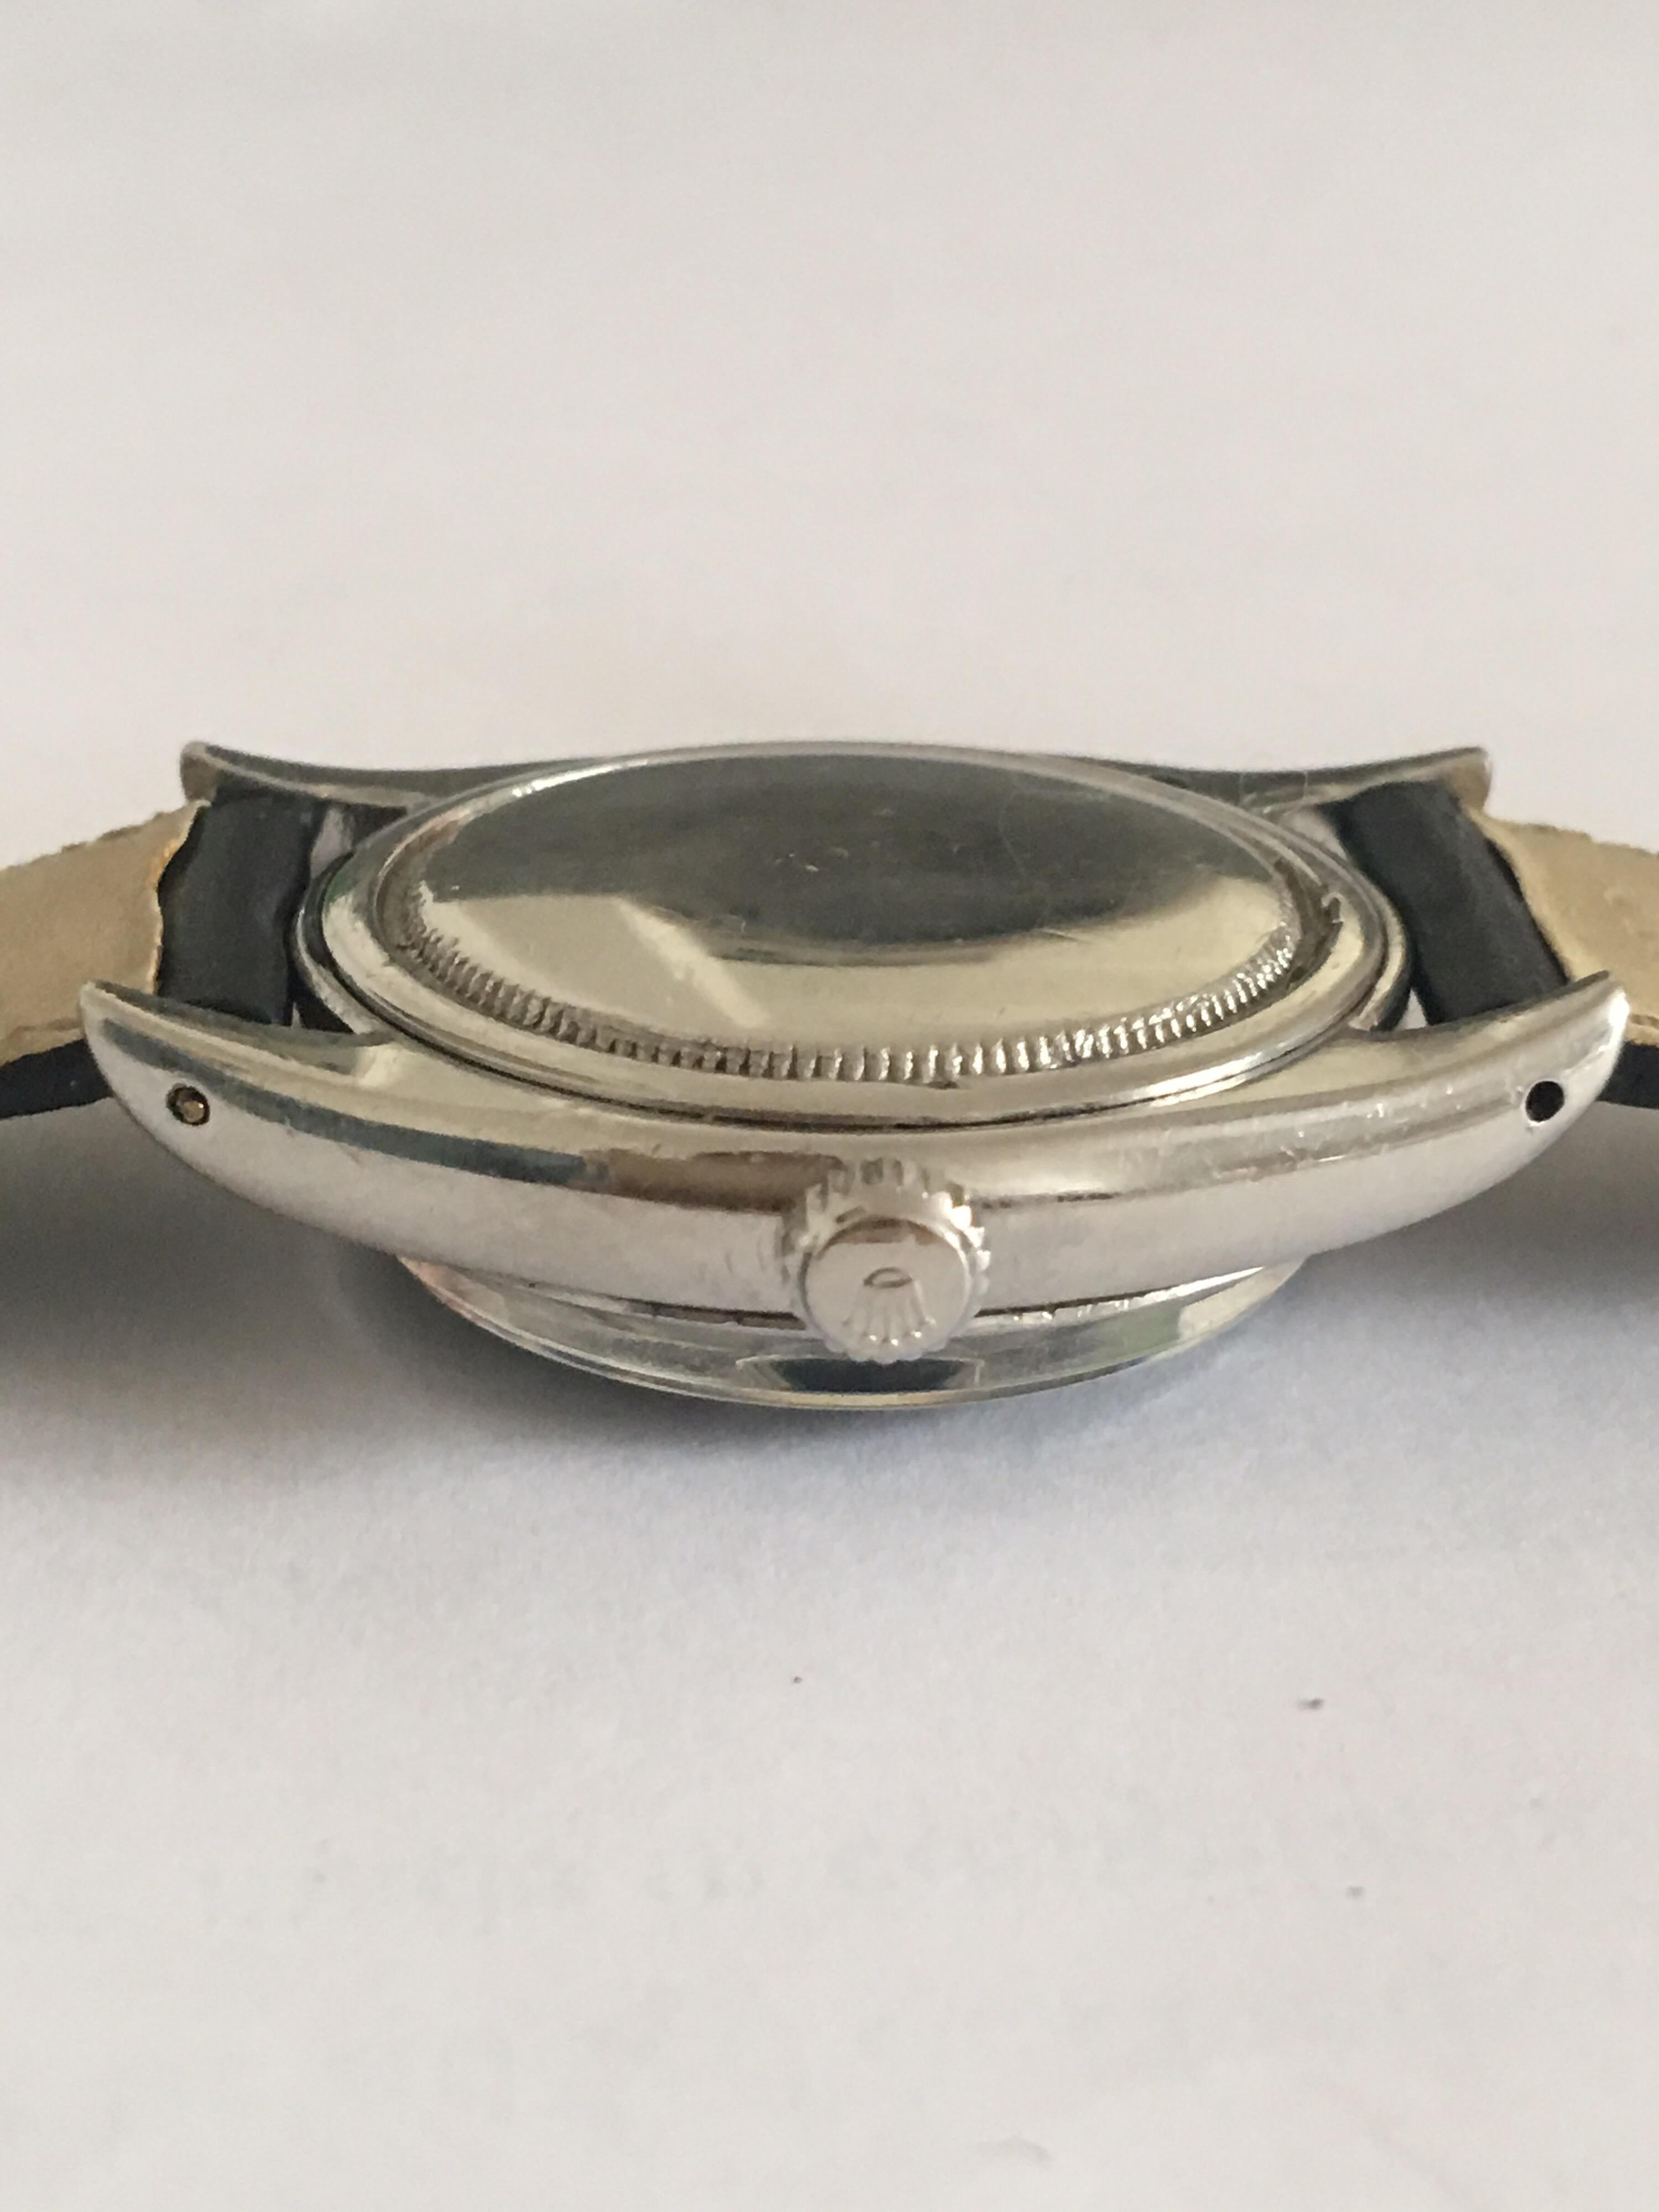 Vintage 1960s Rolex Oyster Date Precision 46561 8